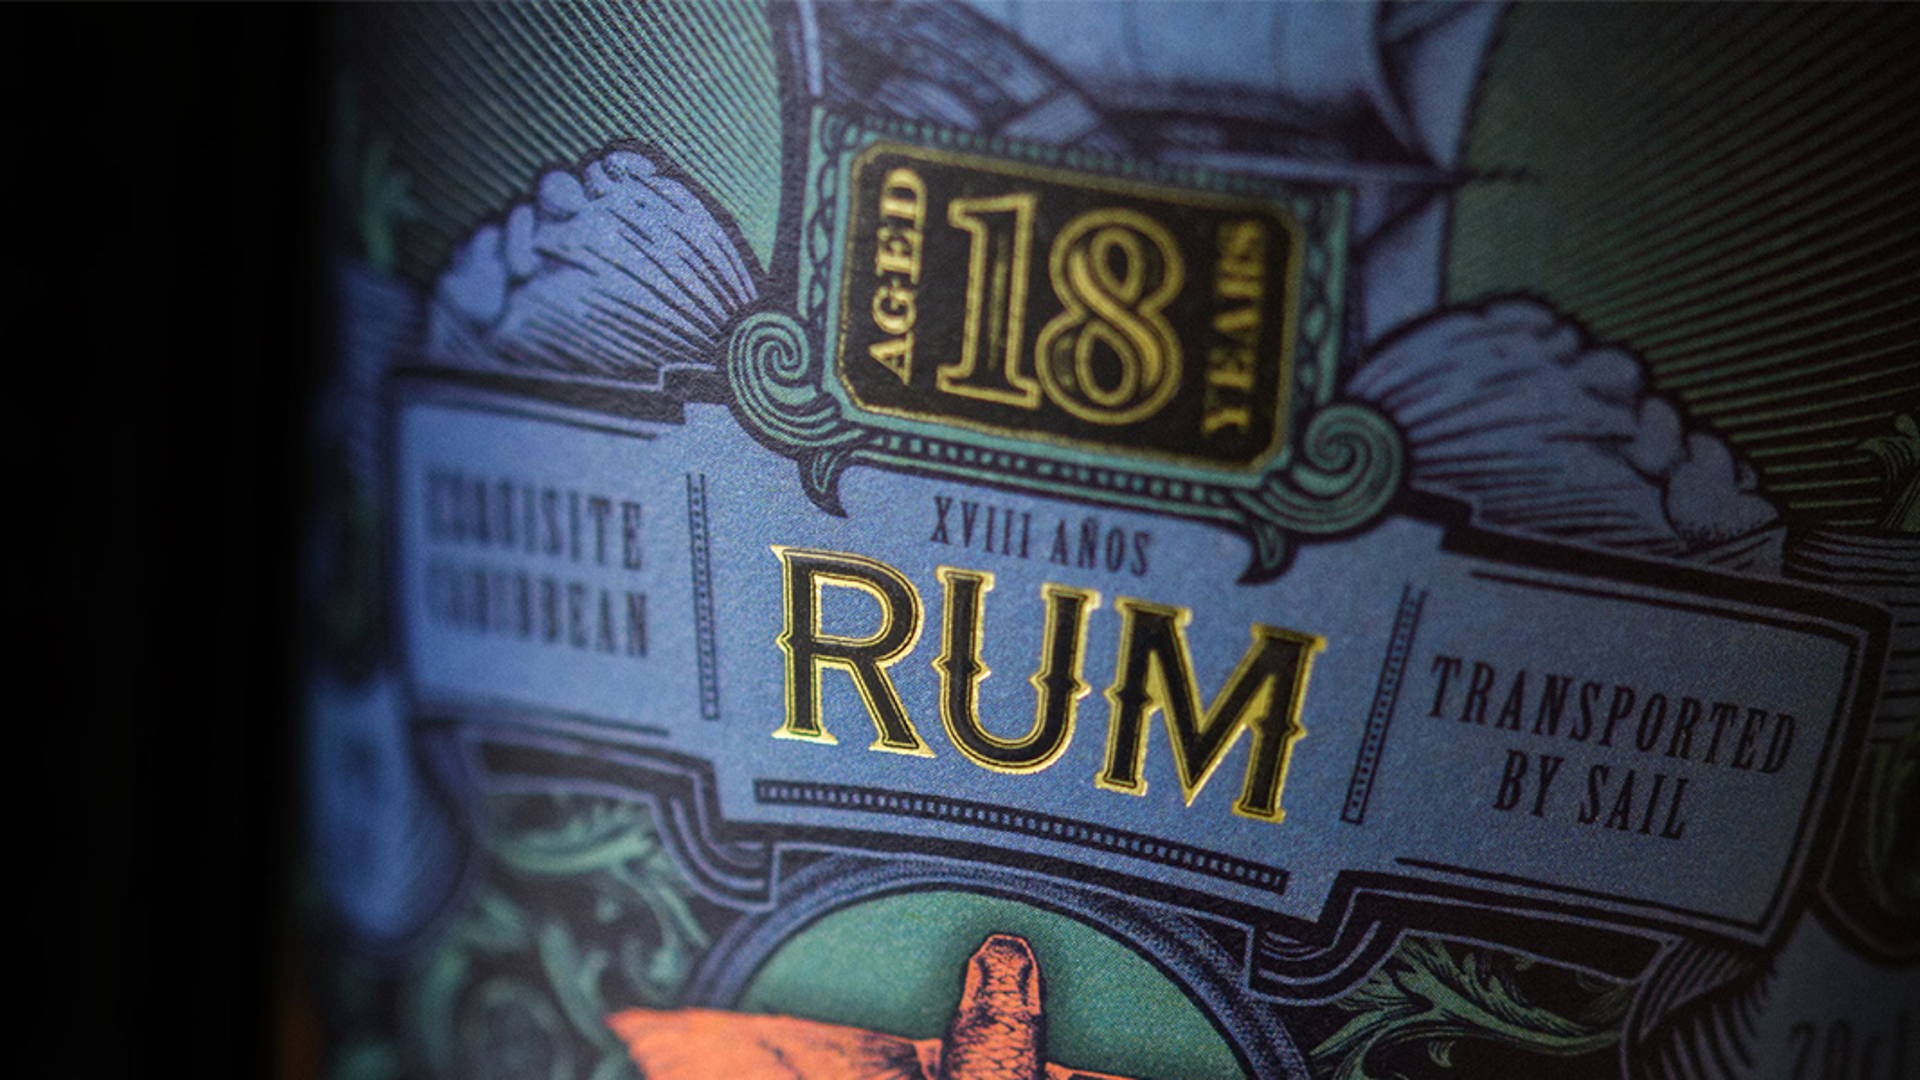 Featured image for New Dawn 18 Year Rum